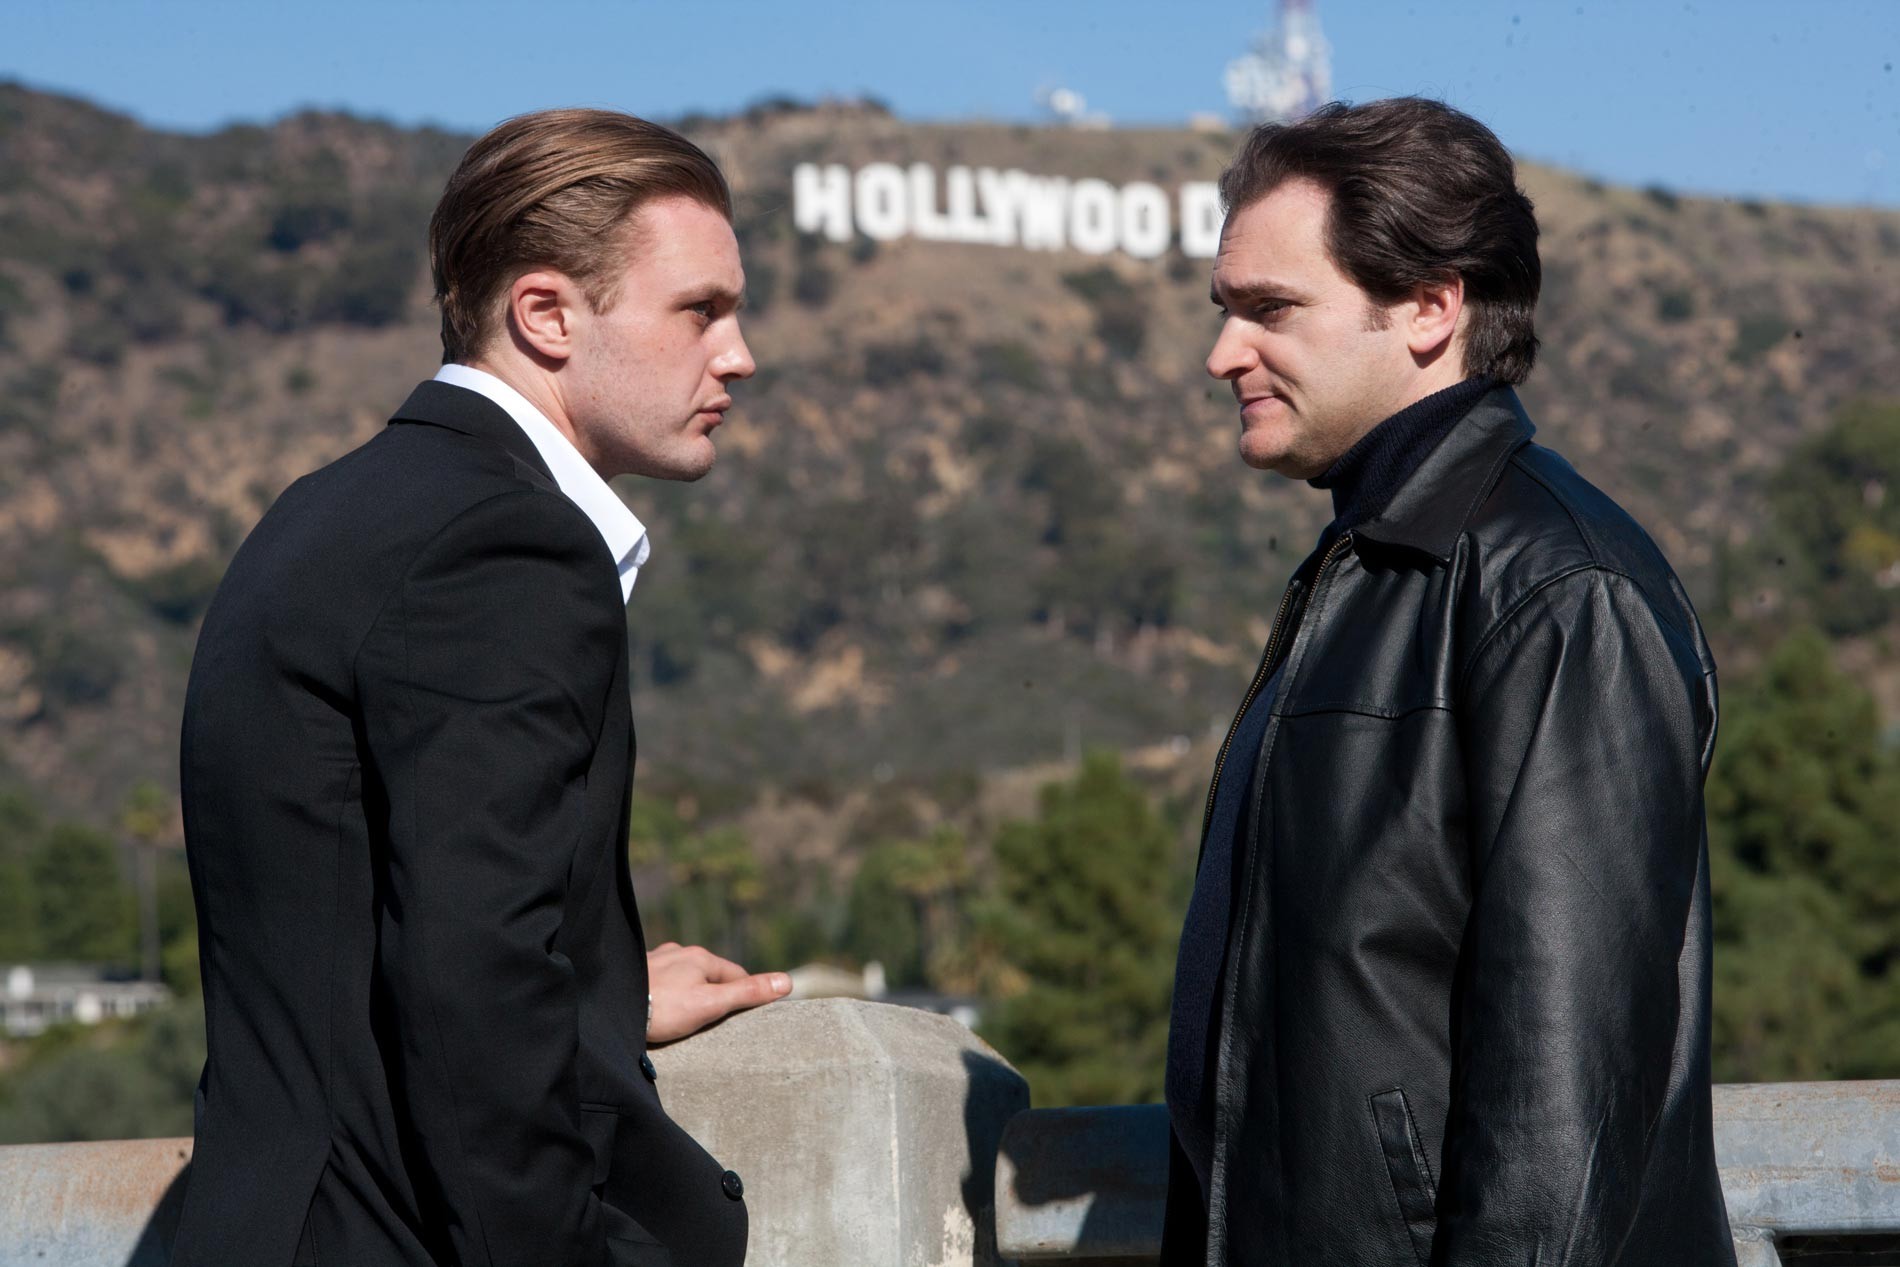 Michael Pitt stars as Larry and Michael Stuhlbarg stars as Tommy in CBS Films' Seven Psychopaths (2012)